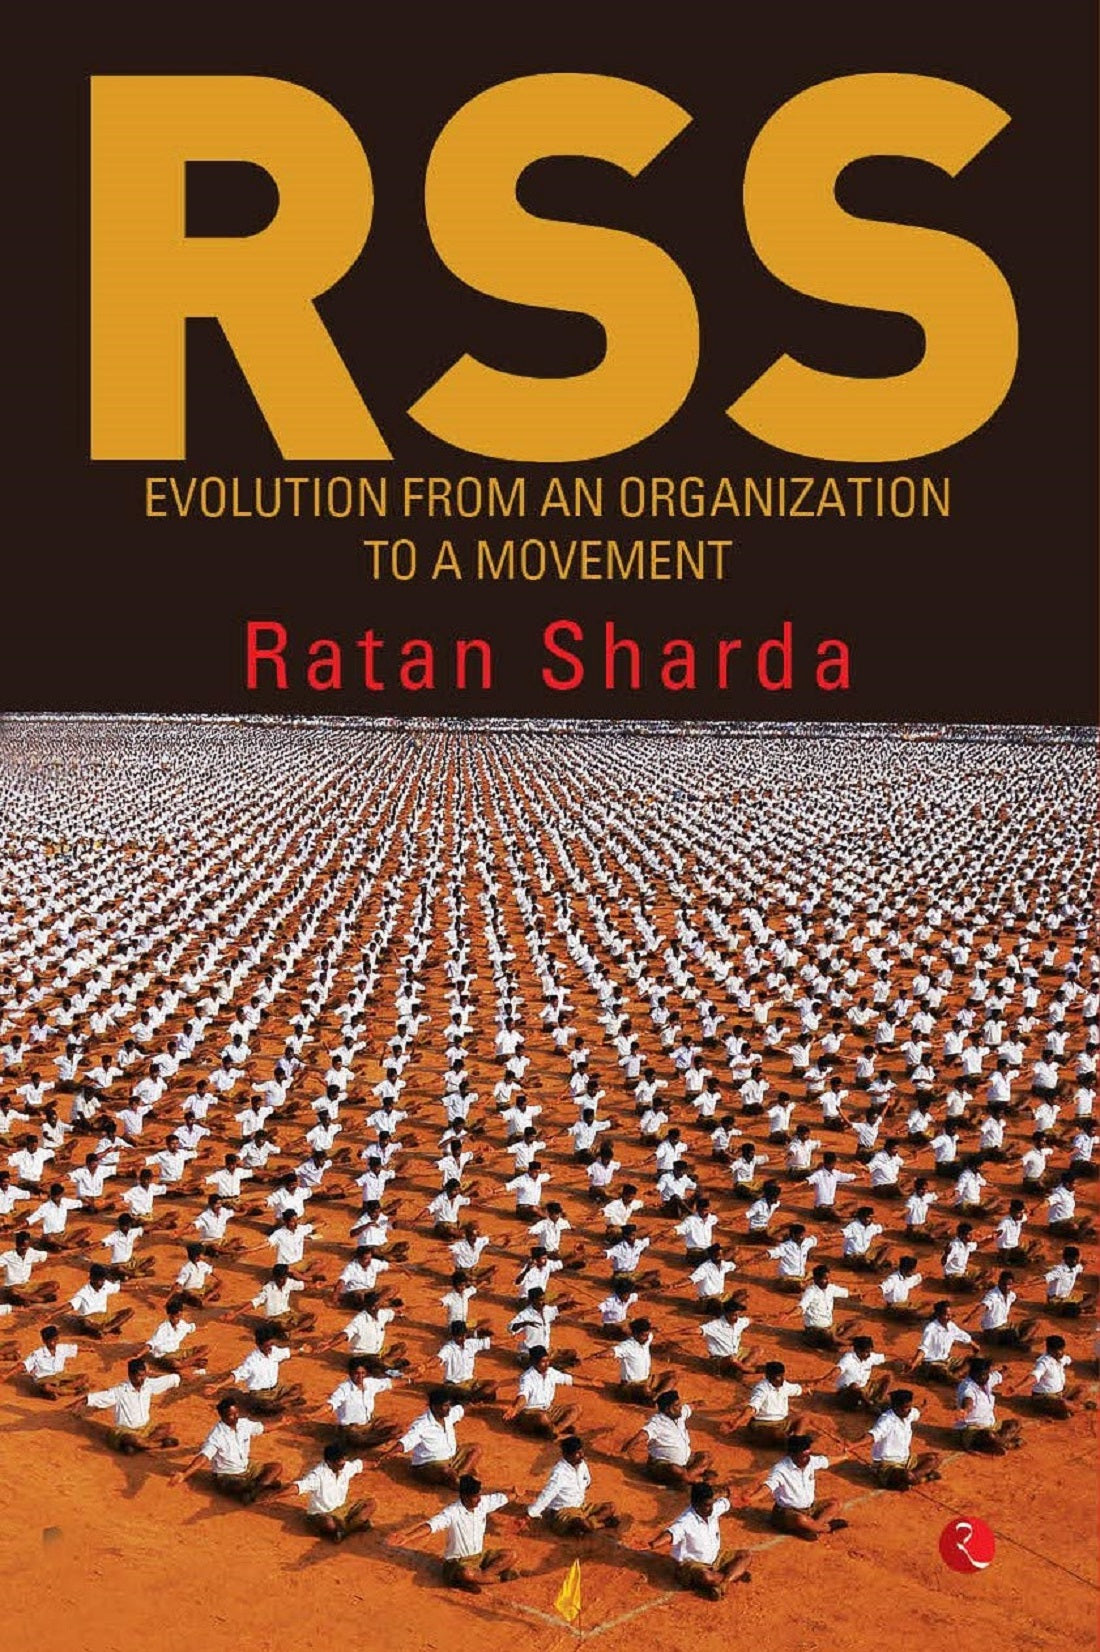 RSS EVOLUTION FROM AN ORGANIZATION TO A MOVEMENT